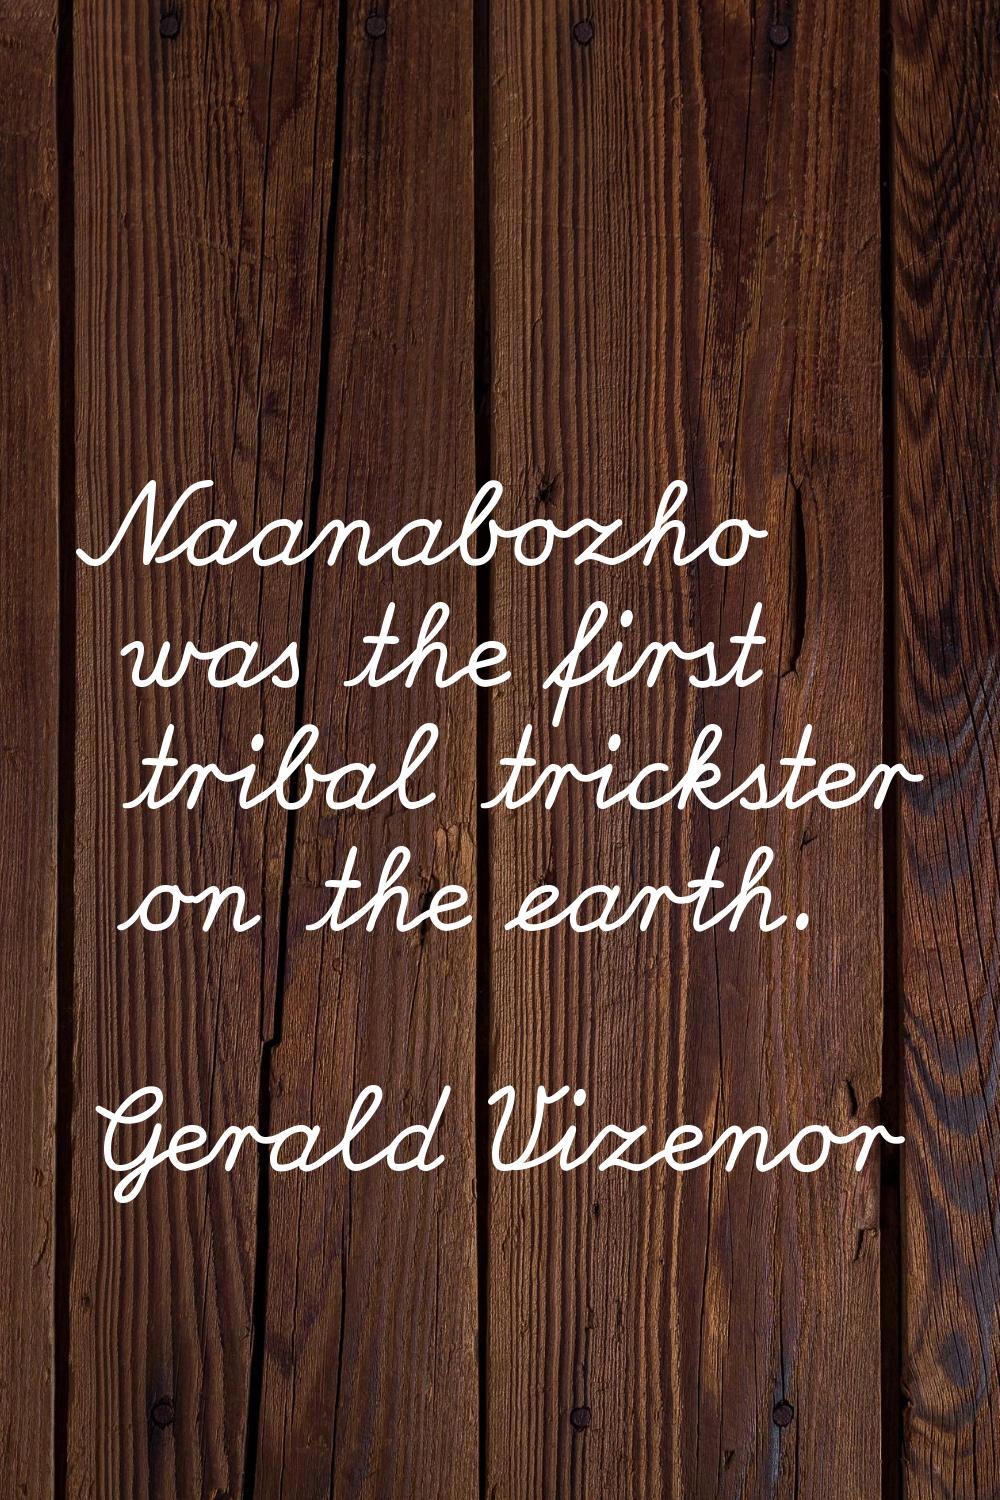 Naanabozho was the first tribal trickster on the earth.